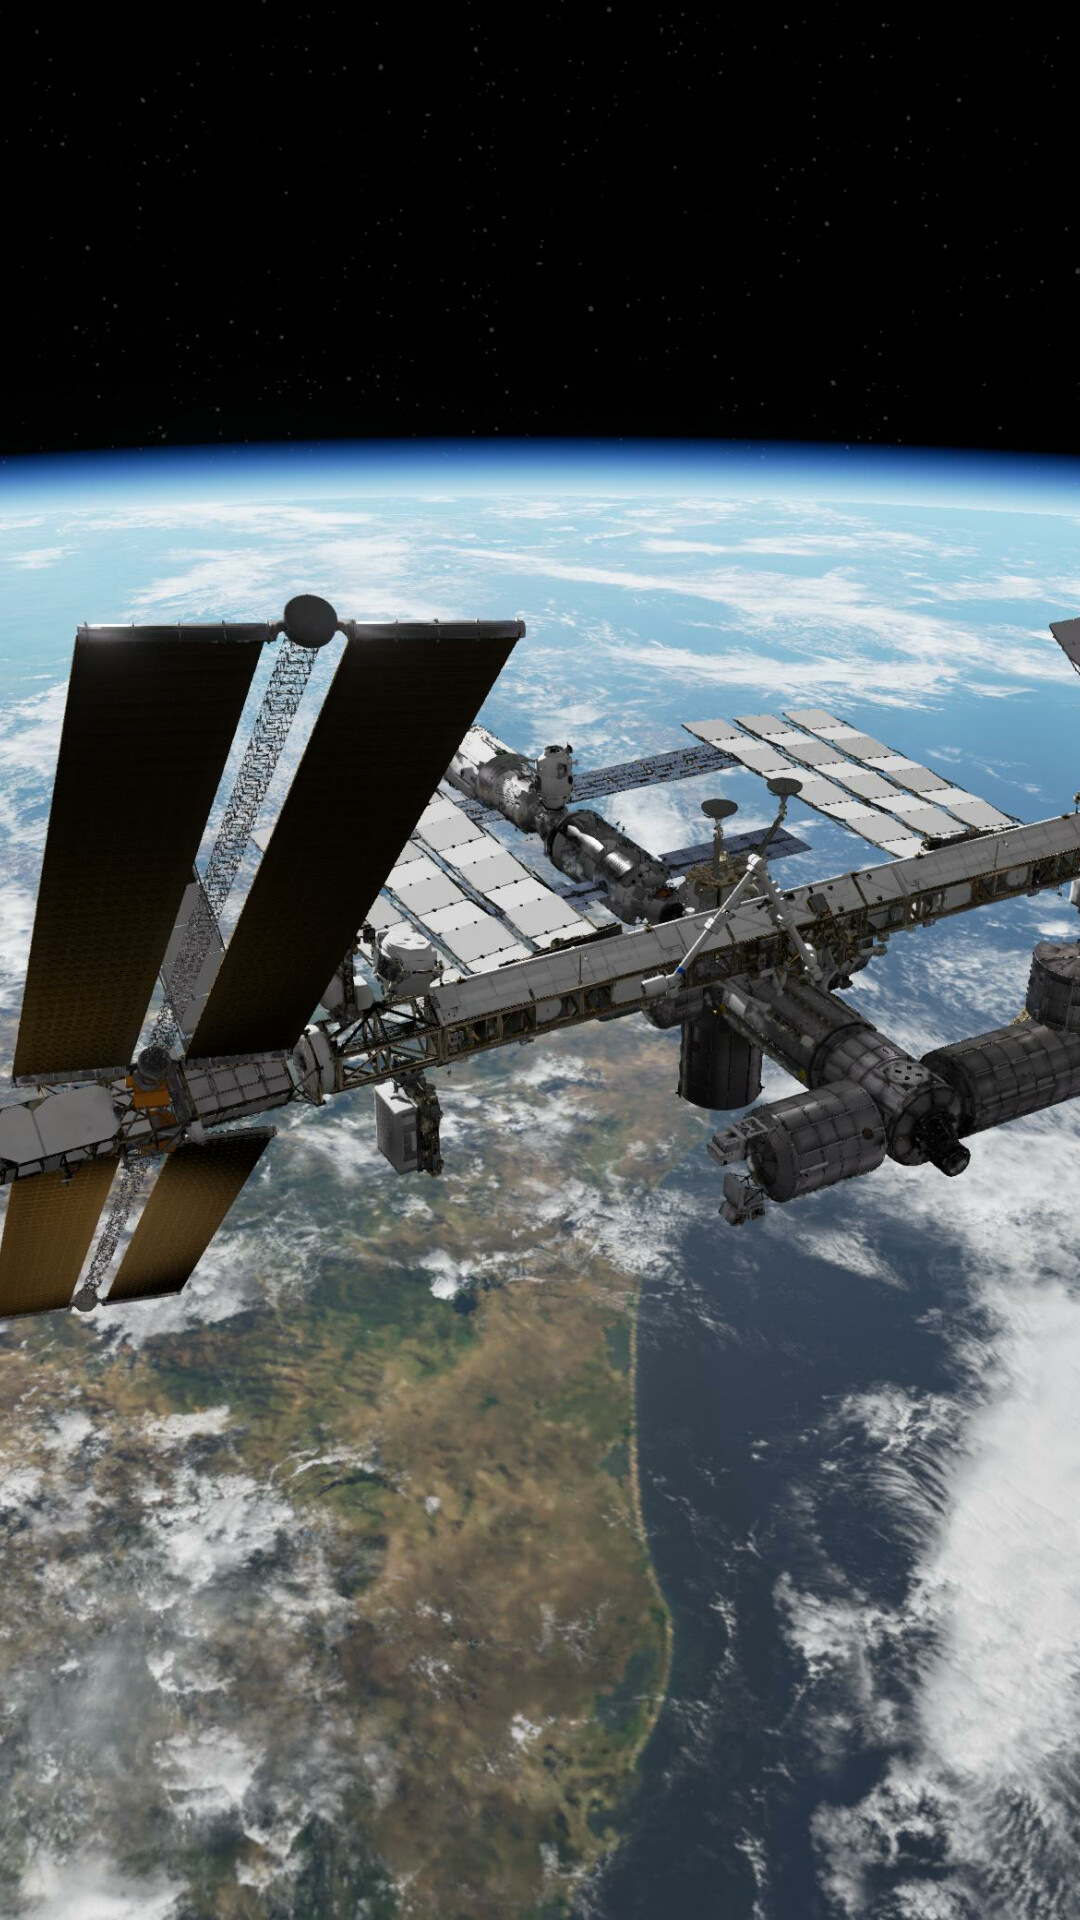 Space Station: ISS, the largest modular artificial satellite in low Earth orbit. 1080x1920 Full HD Wallpaper.